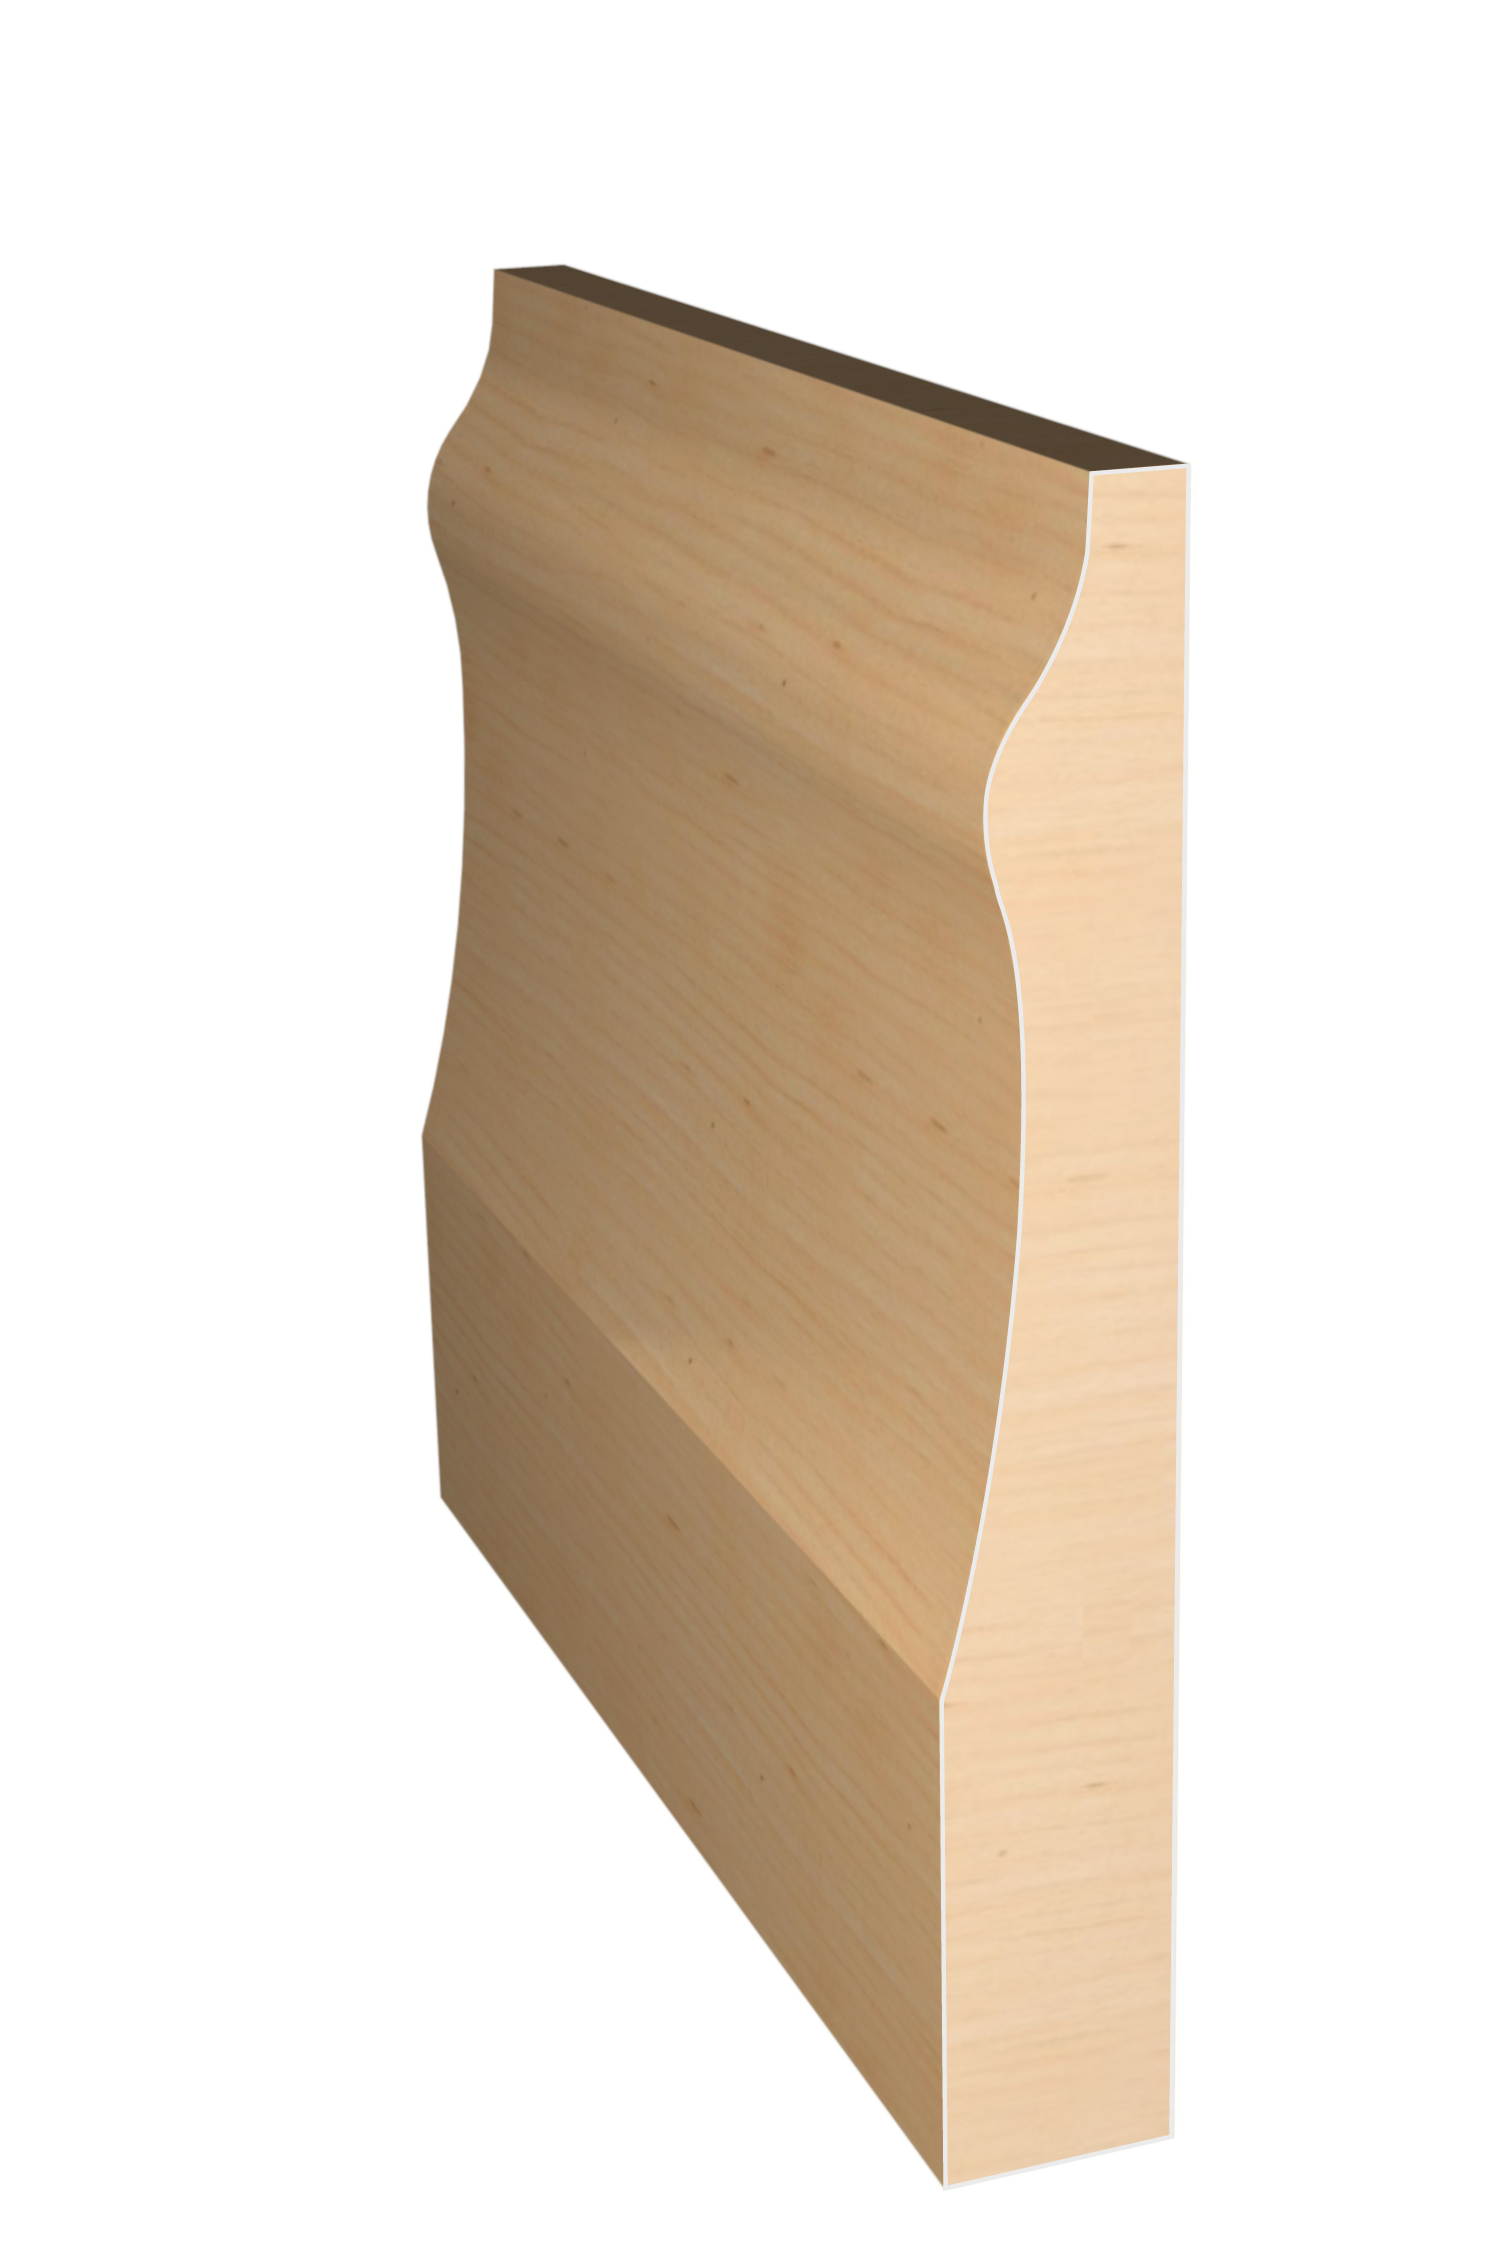 Three dimensional rendering of custom base wood molding BAPL5126 made by Public Lumber Company in Detroit.